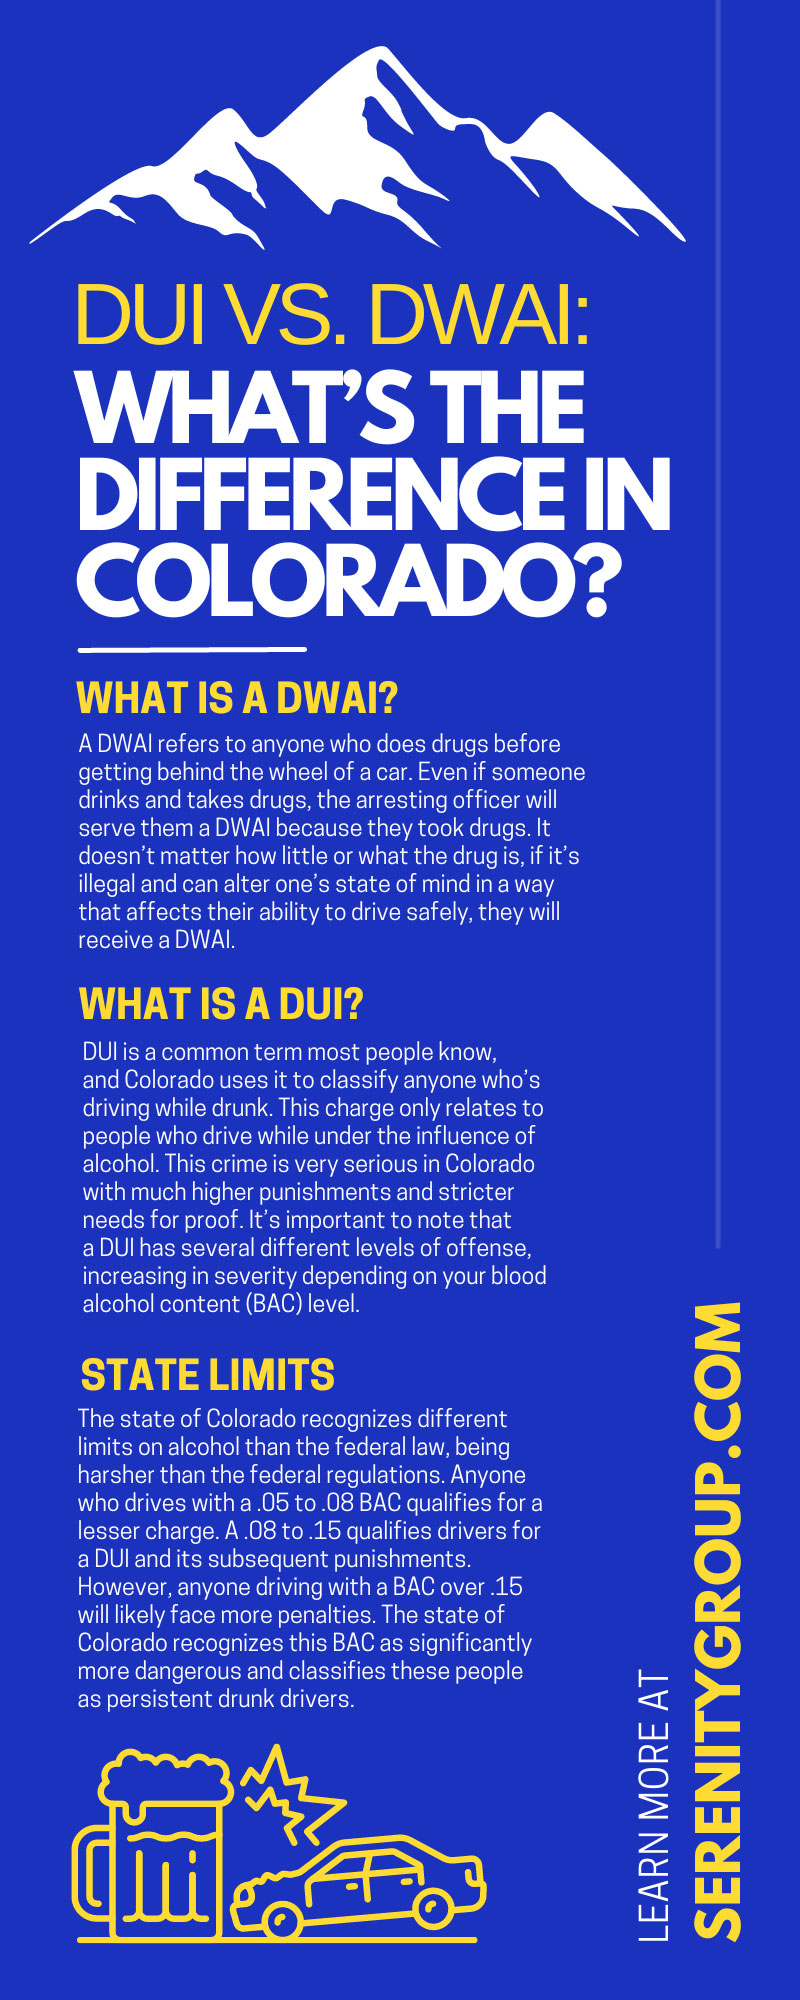 DUI vs. DWAI: What’s the Difference in Colorado?